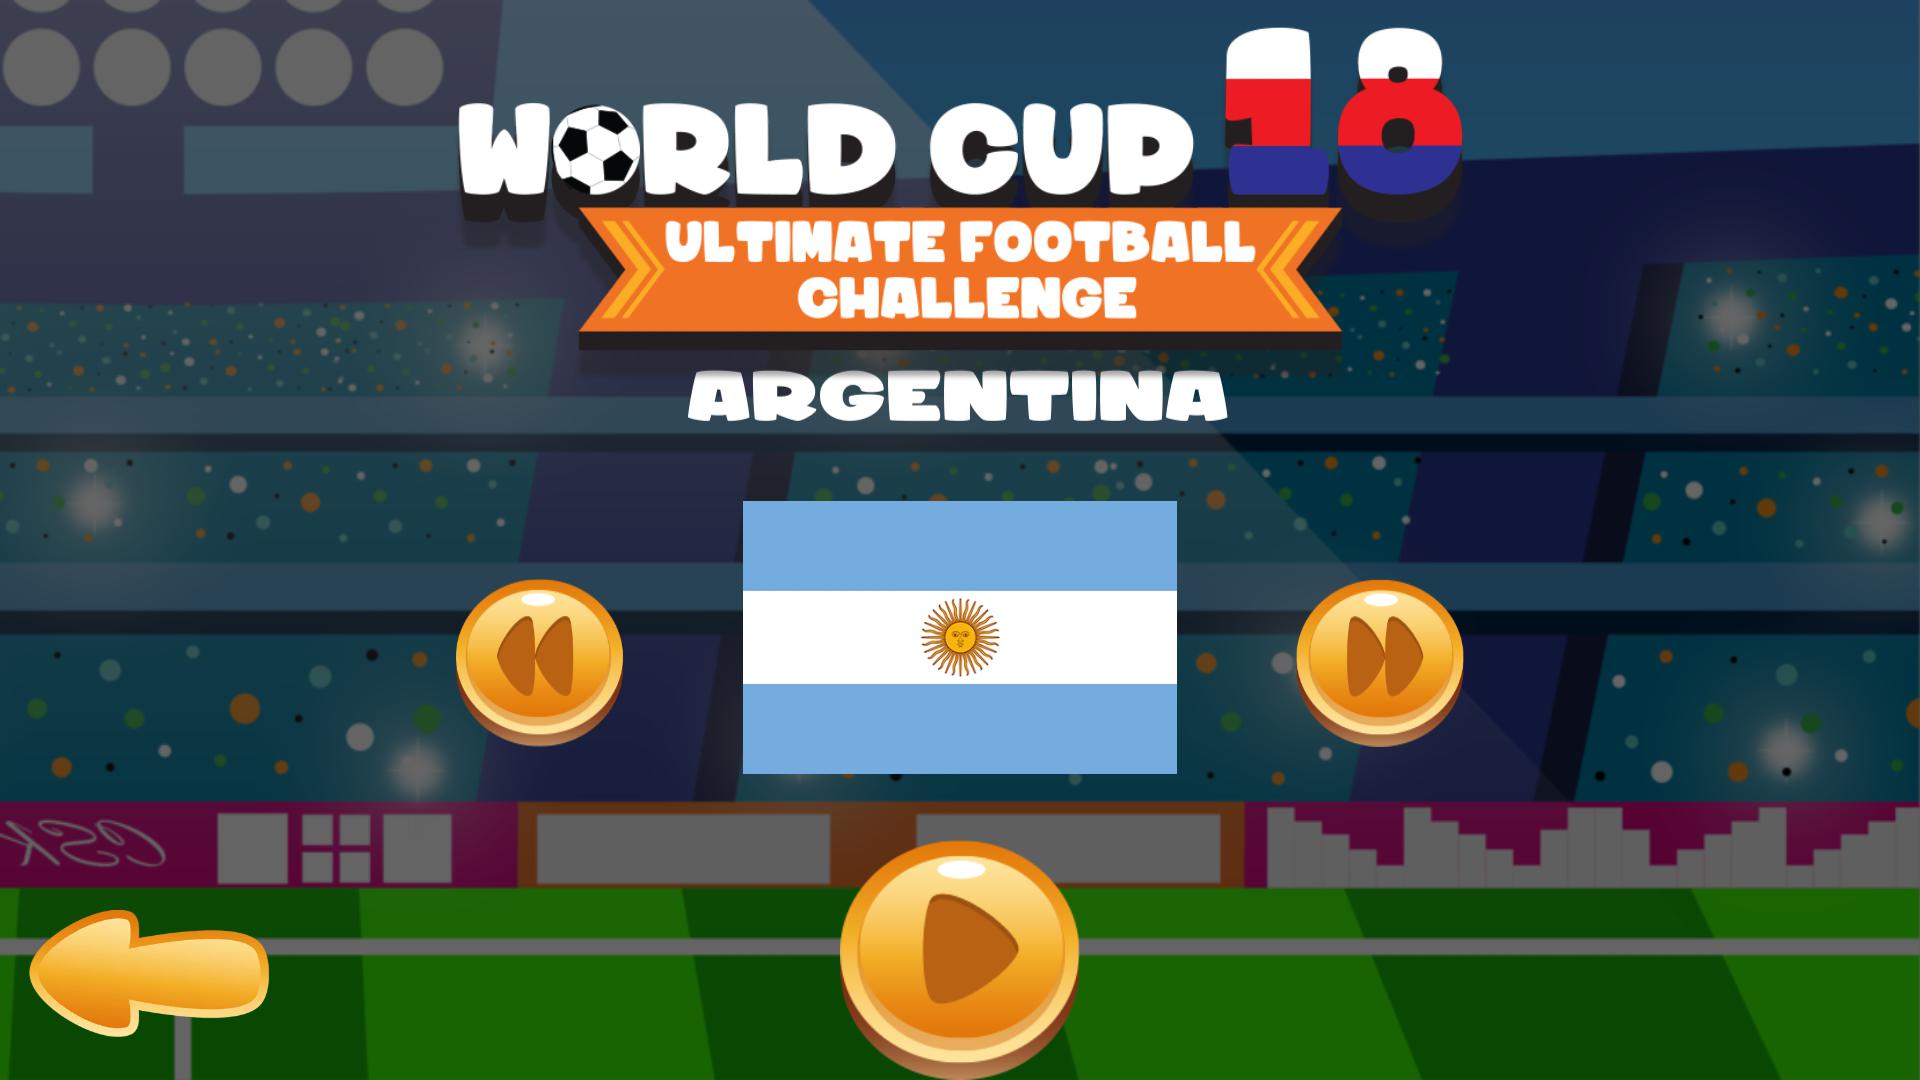 World cup 2018: Ultimate Football Challenge_游戏简介_图3